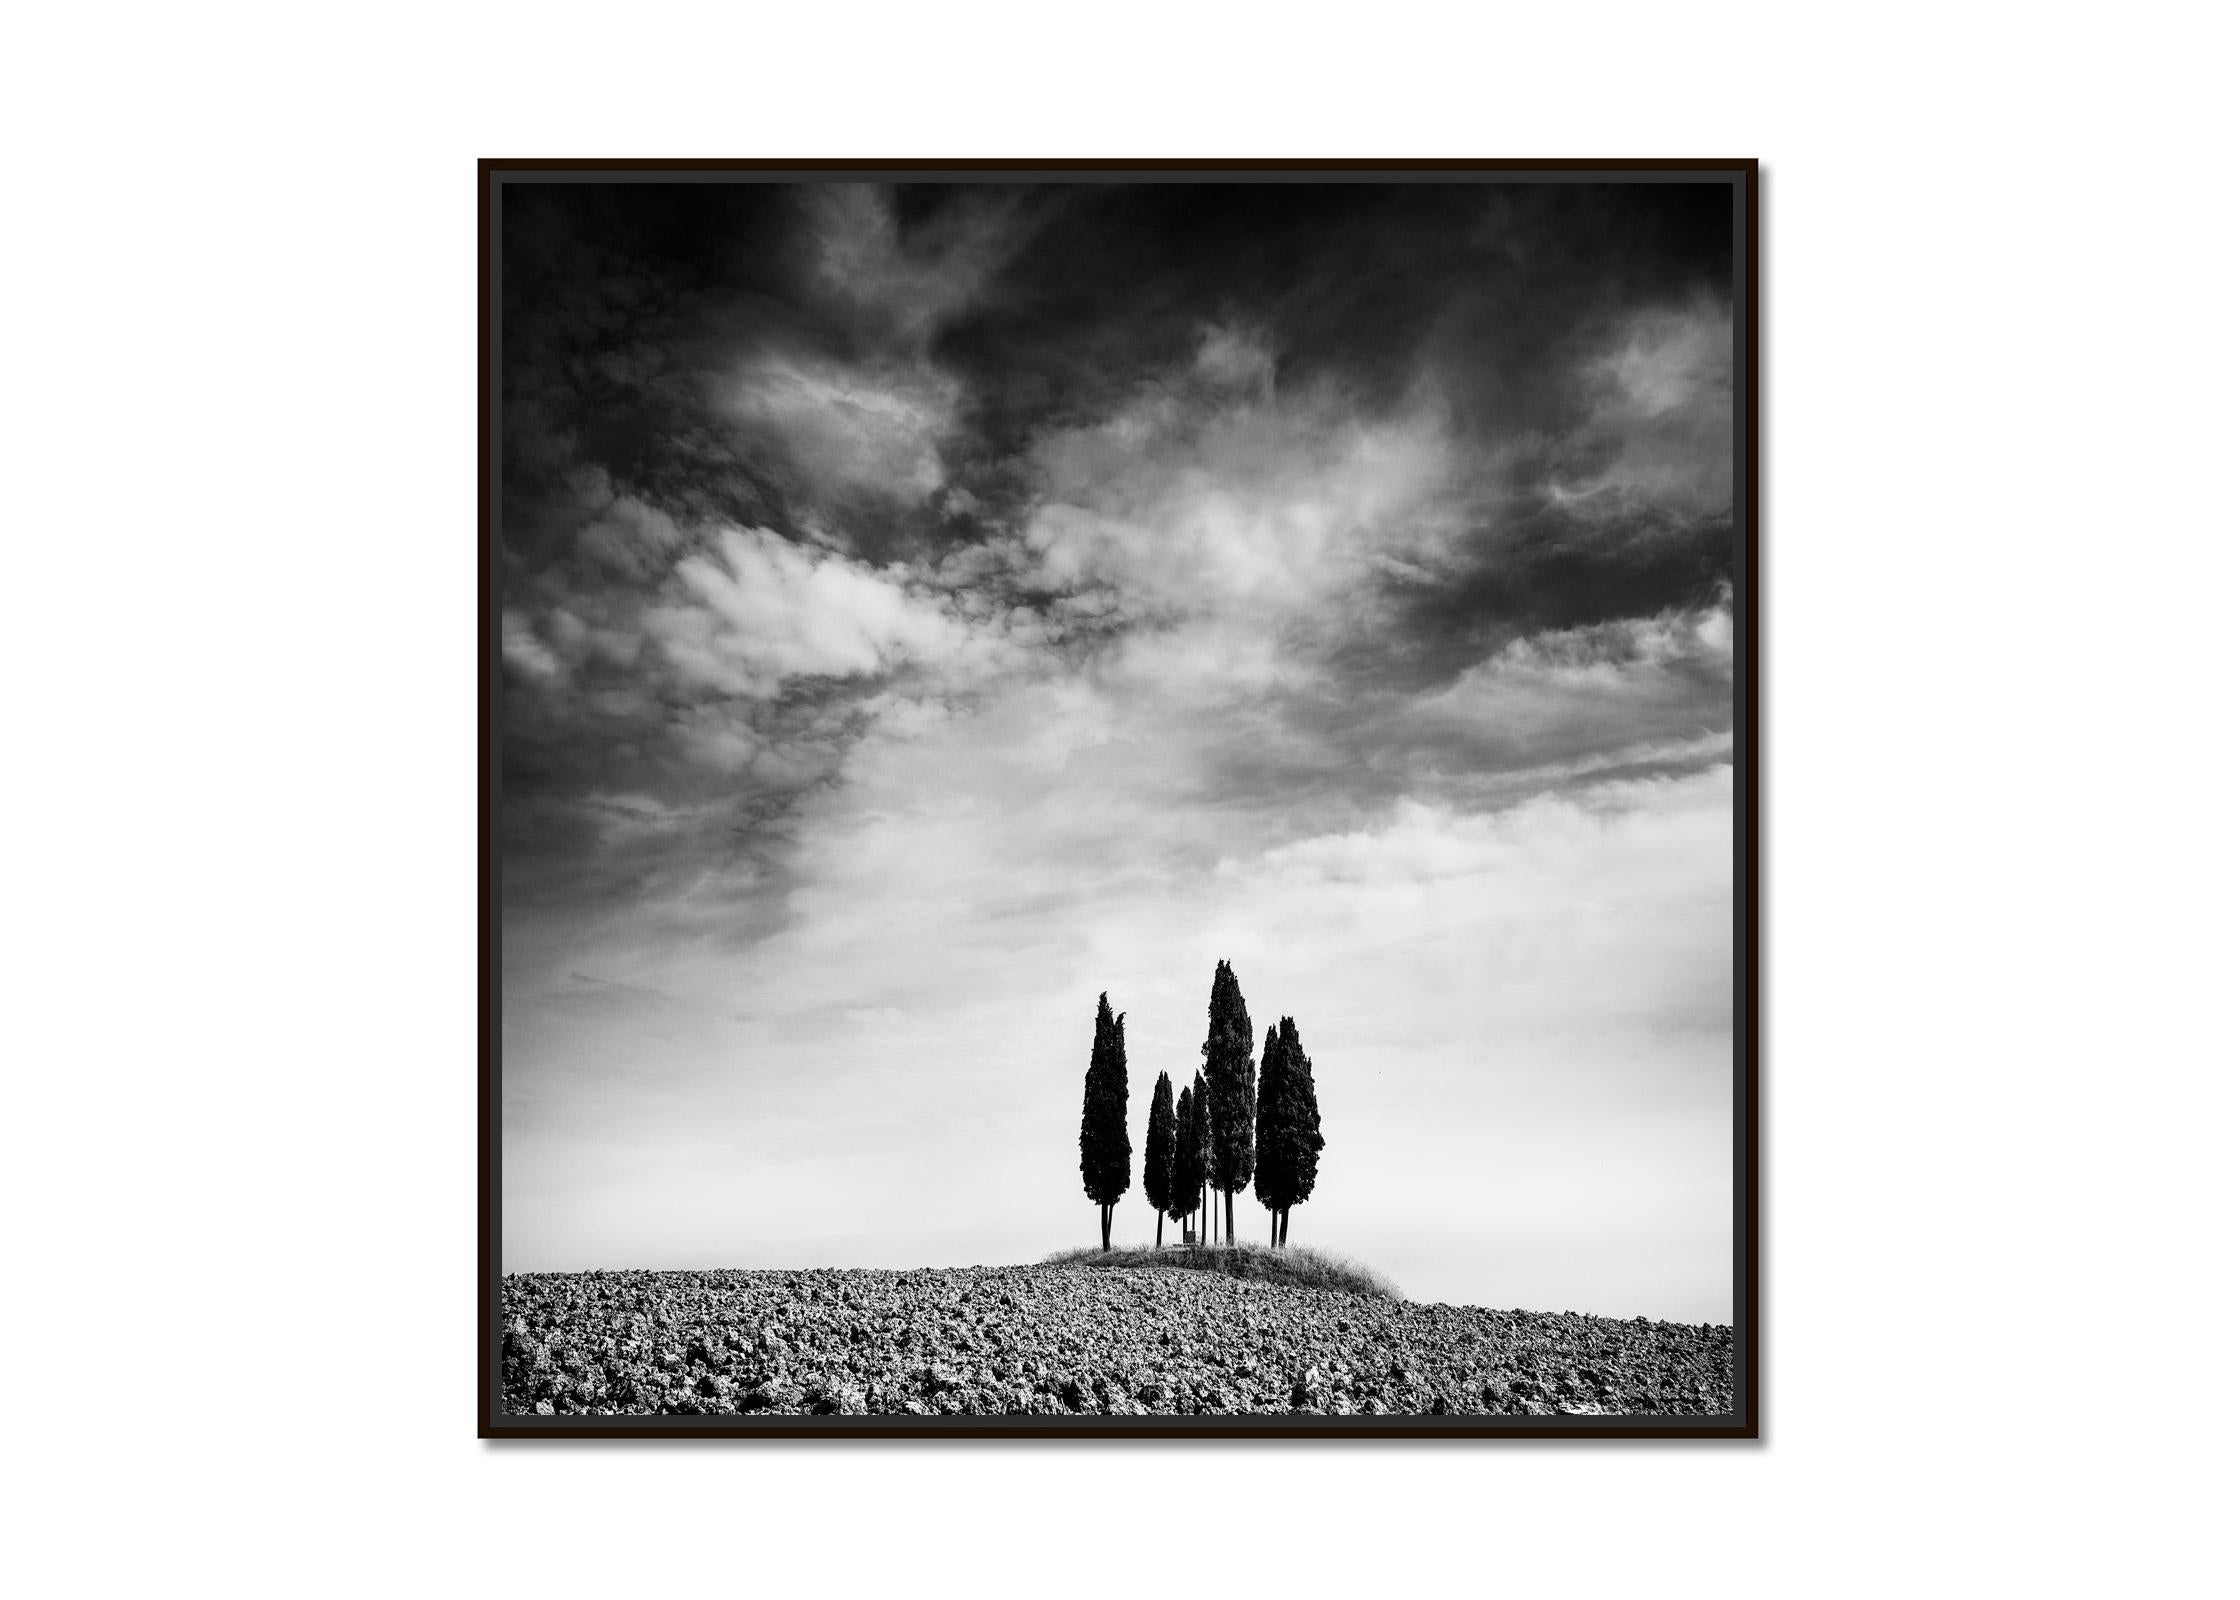 Circle of Cypress Trees Tuscany Italy black and white landscape art photography  - Photograph by Gerald Berghammer